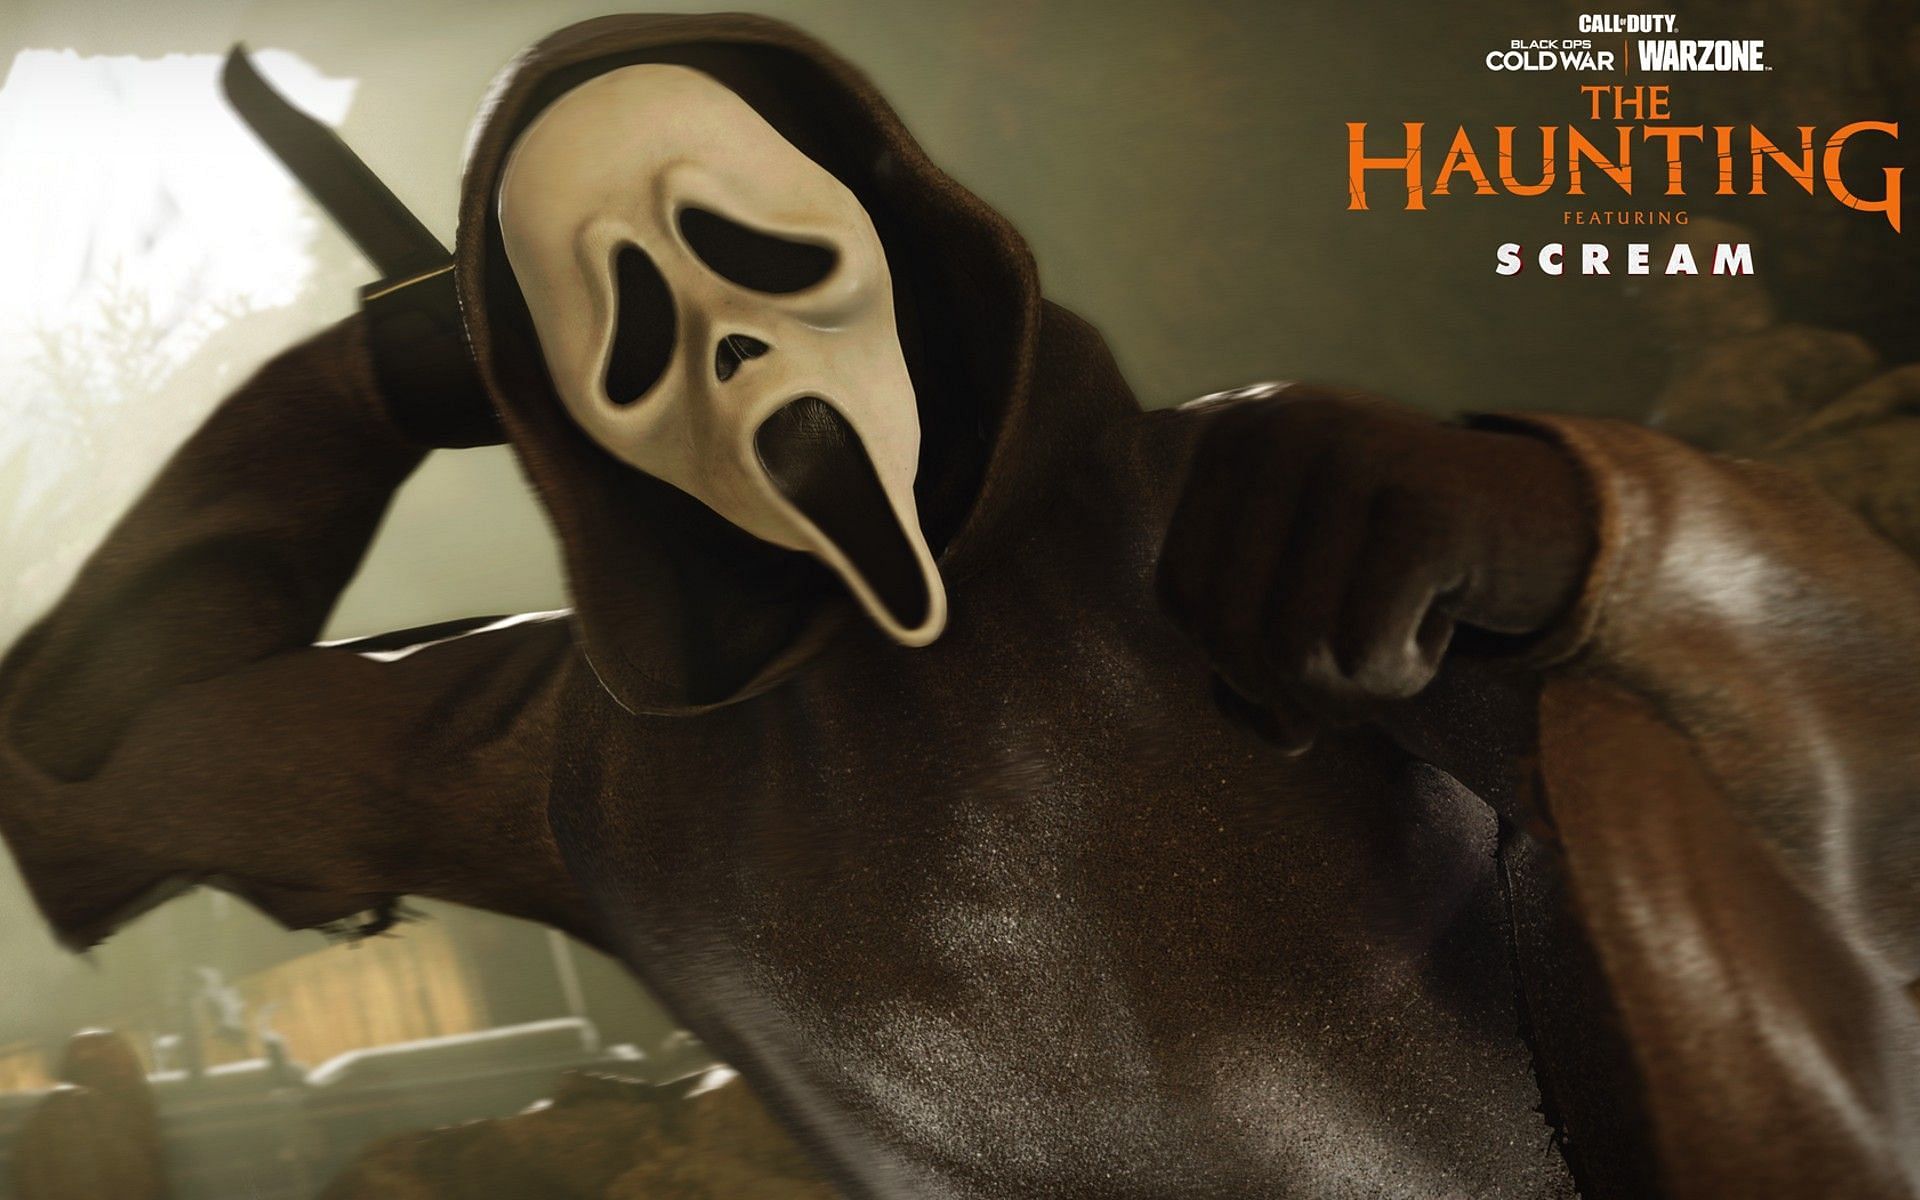 Ghostface appears during Halloween in Verdansk. (Image via Activision)